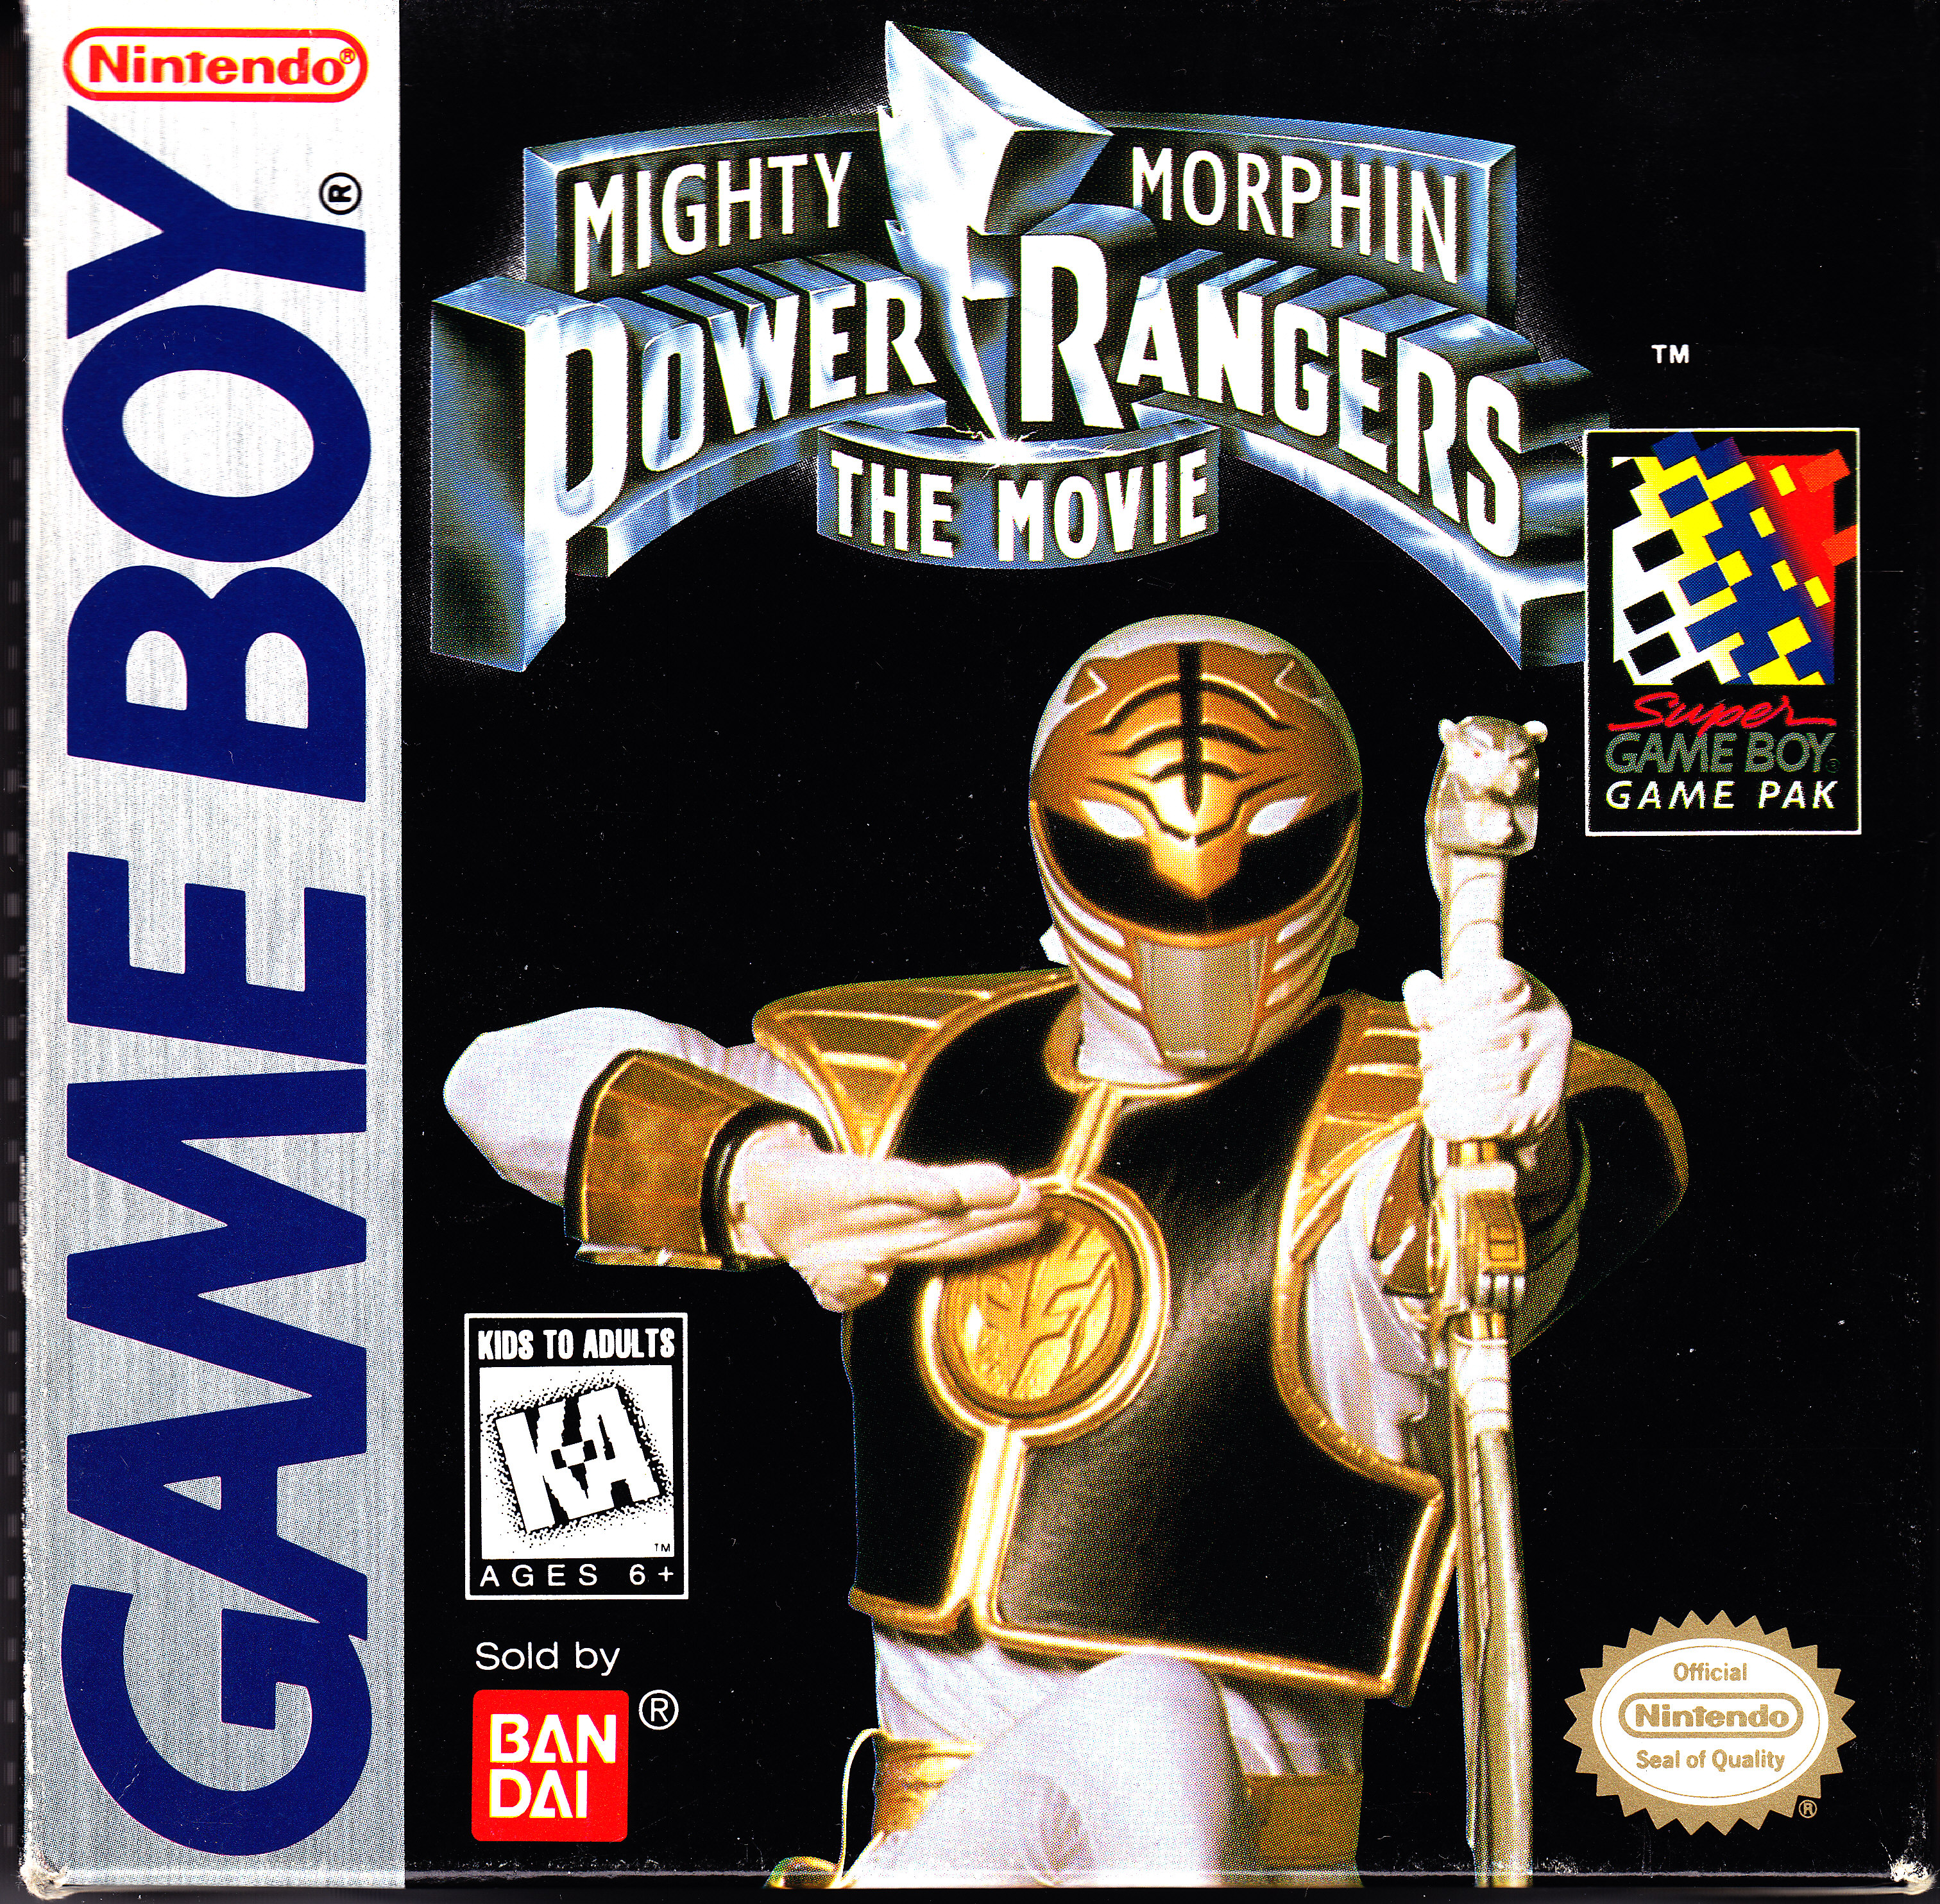 Where can you find Power Ranger-themed games?